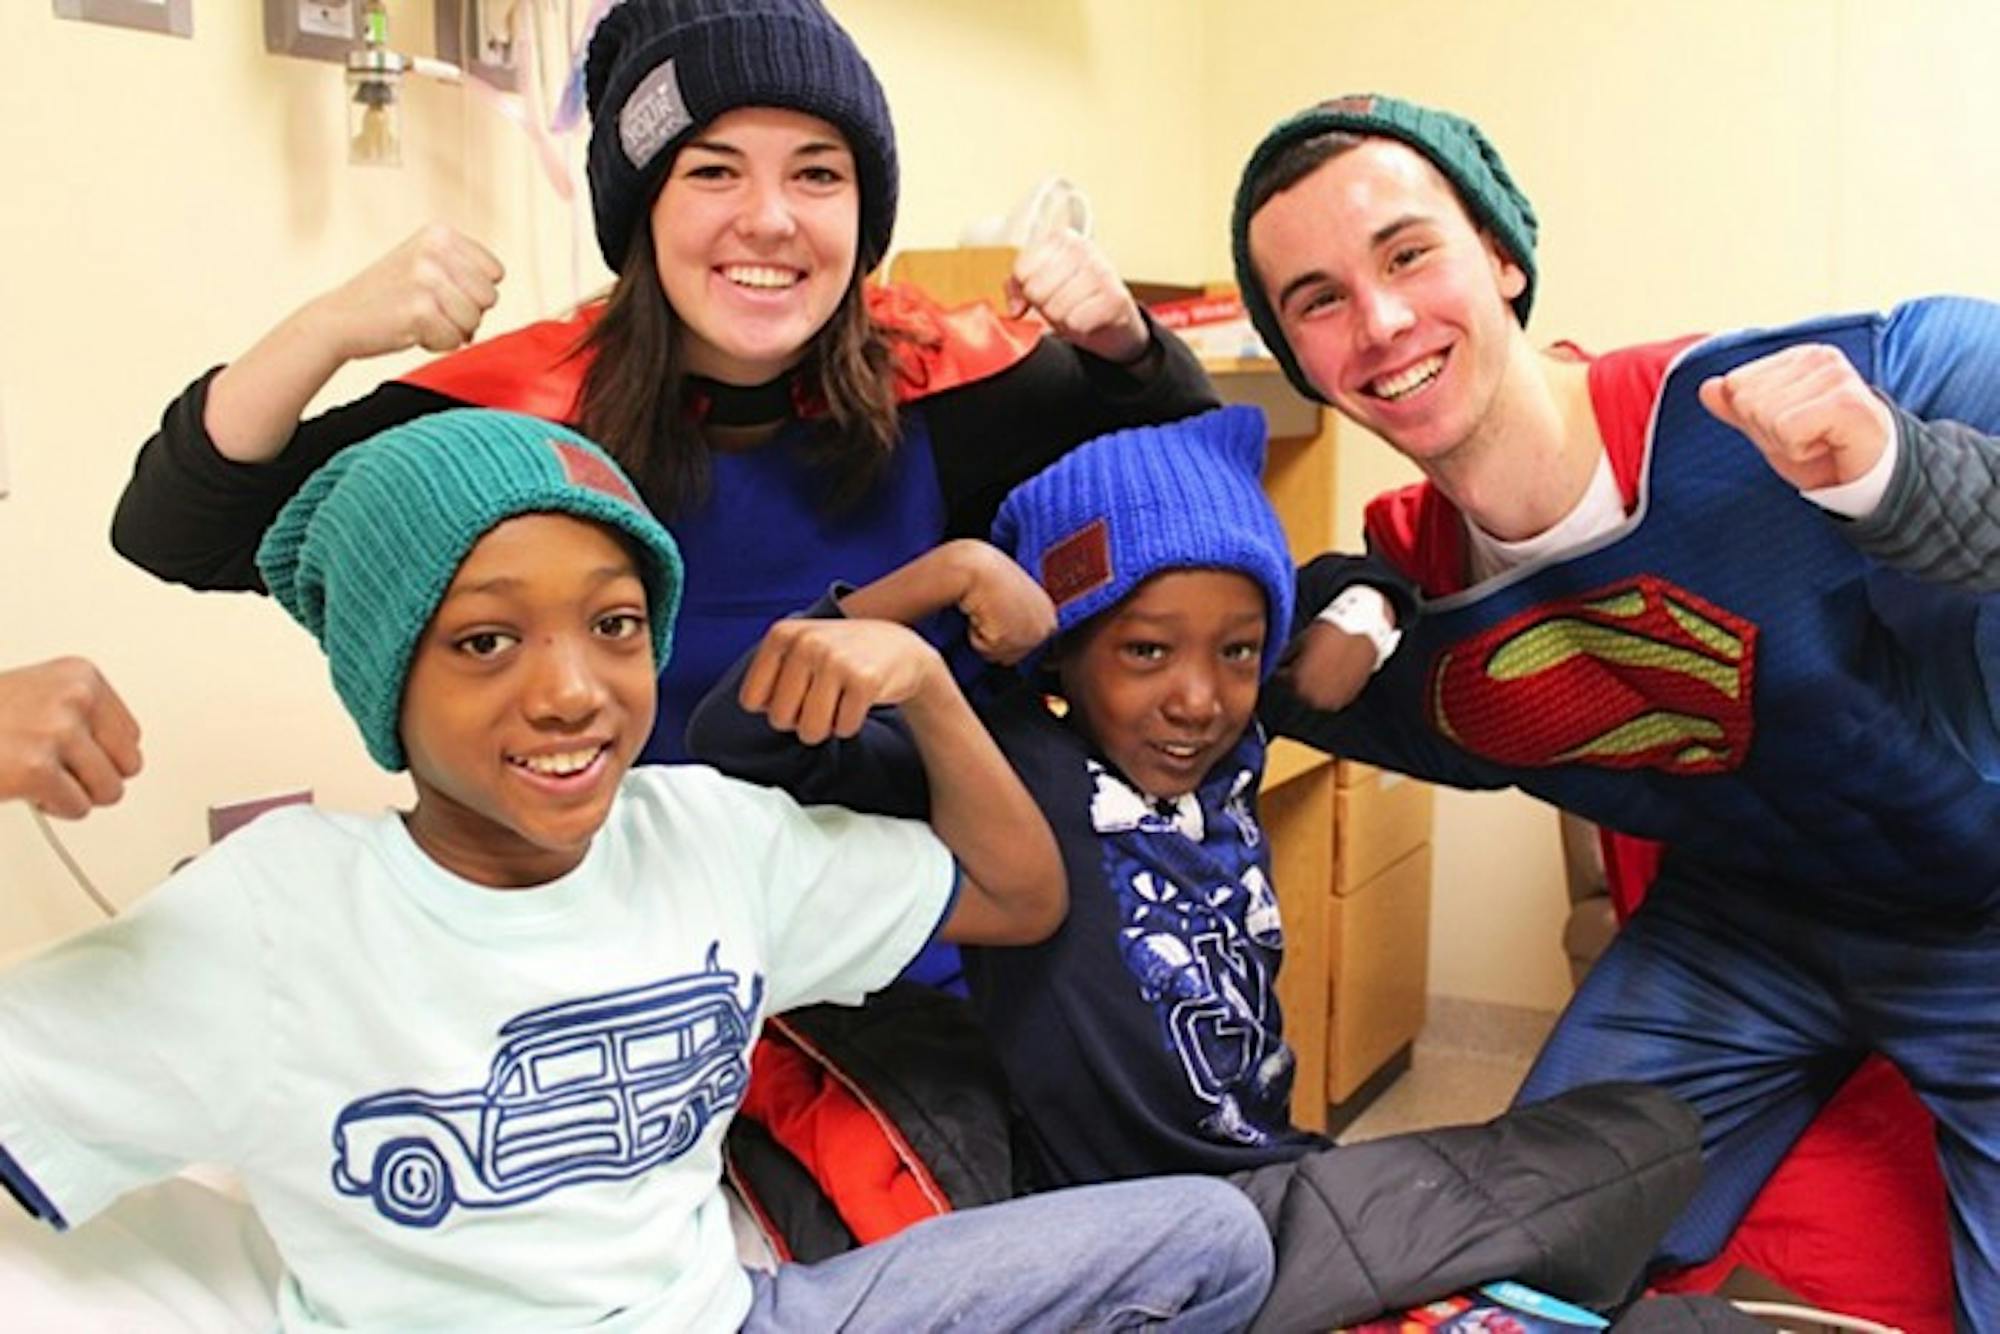 Notre Dame students visit Memorial Hospital in South Bend to give hats to children battling cancer and their families on March 18.